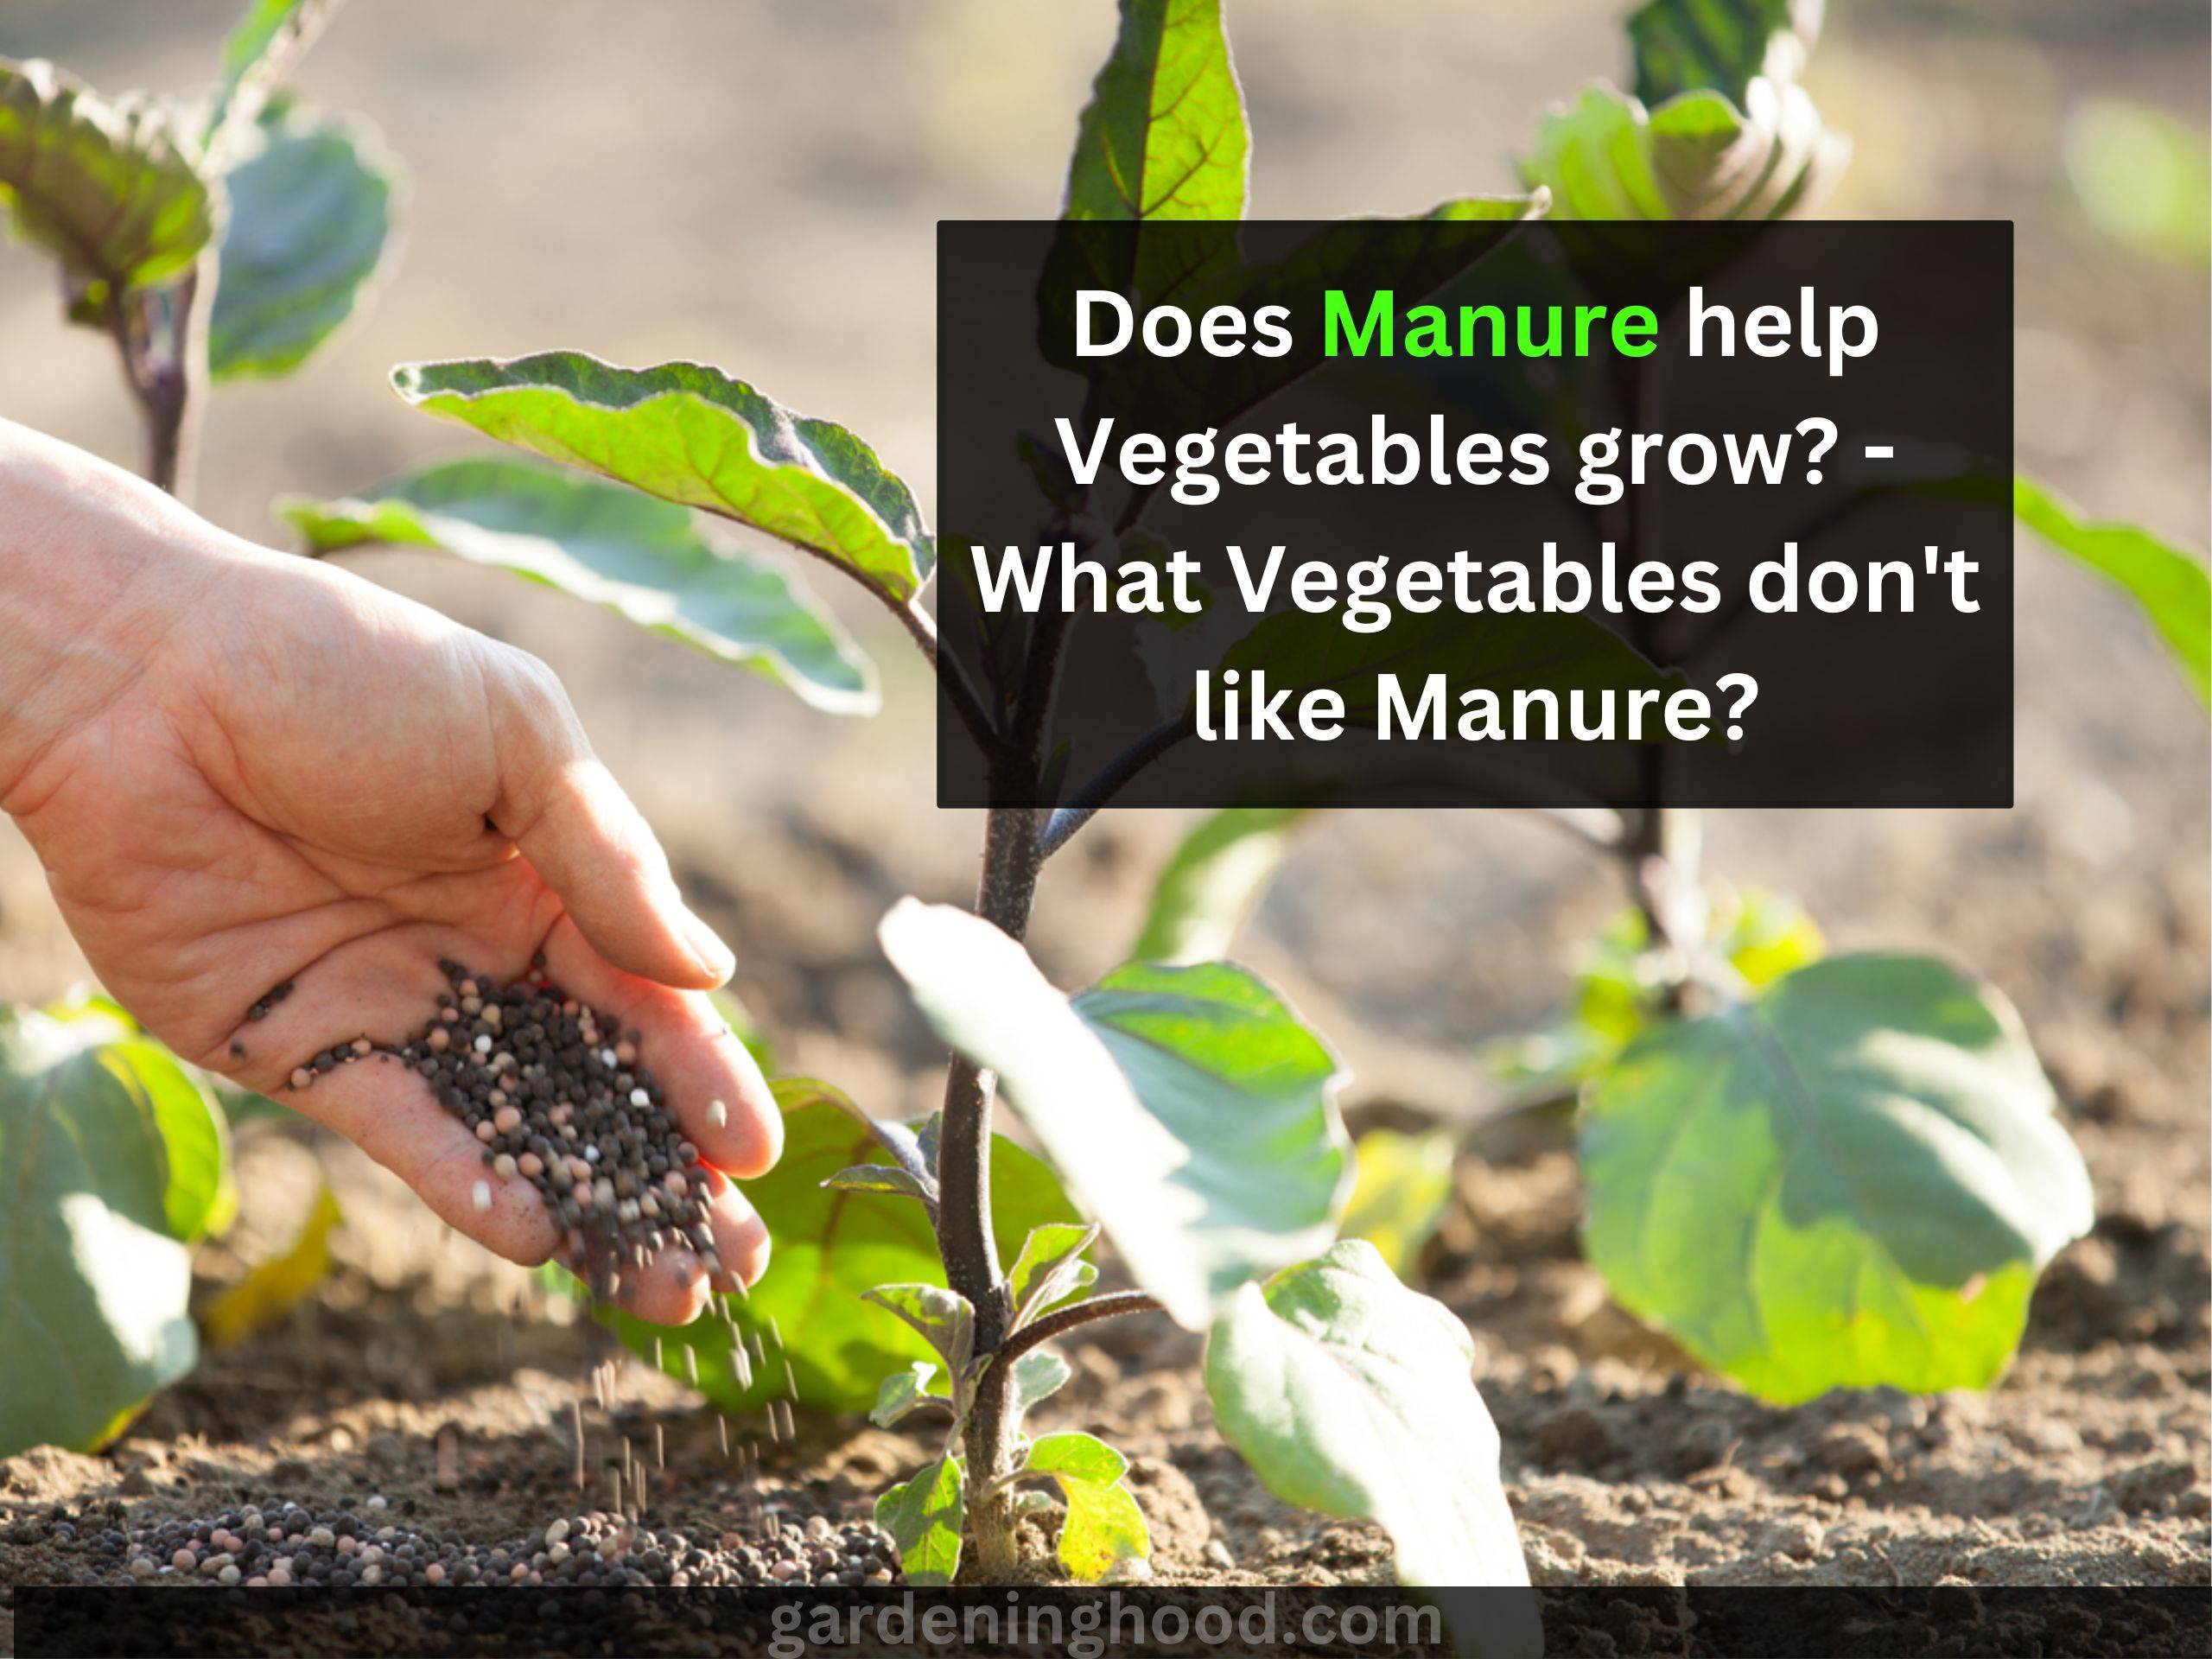 Does Manure help Vegetables grow? - What Vegetables don't like Manure?